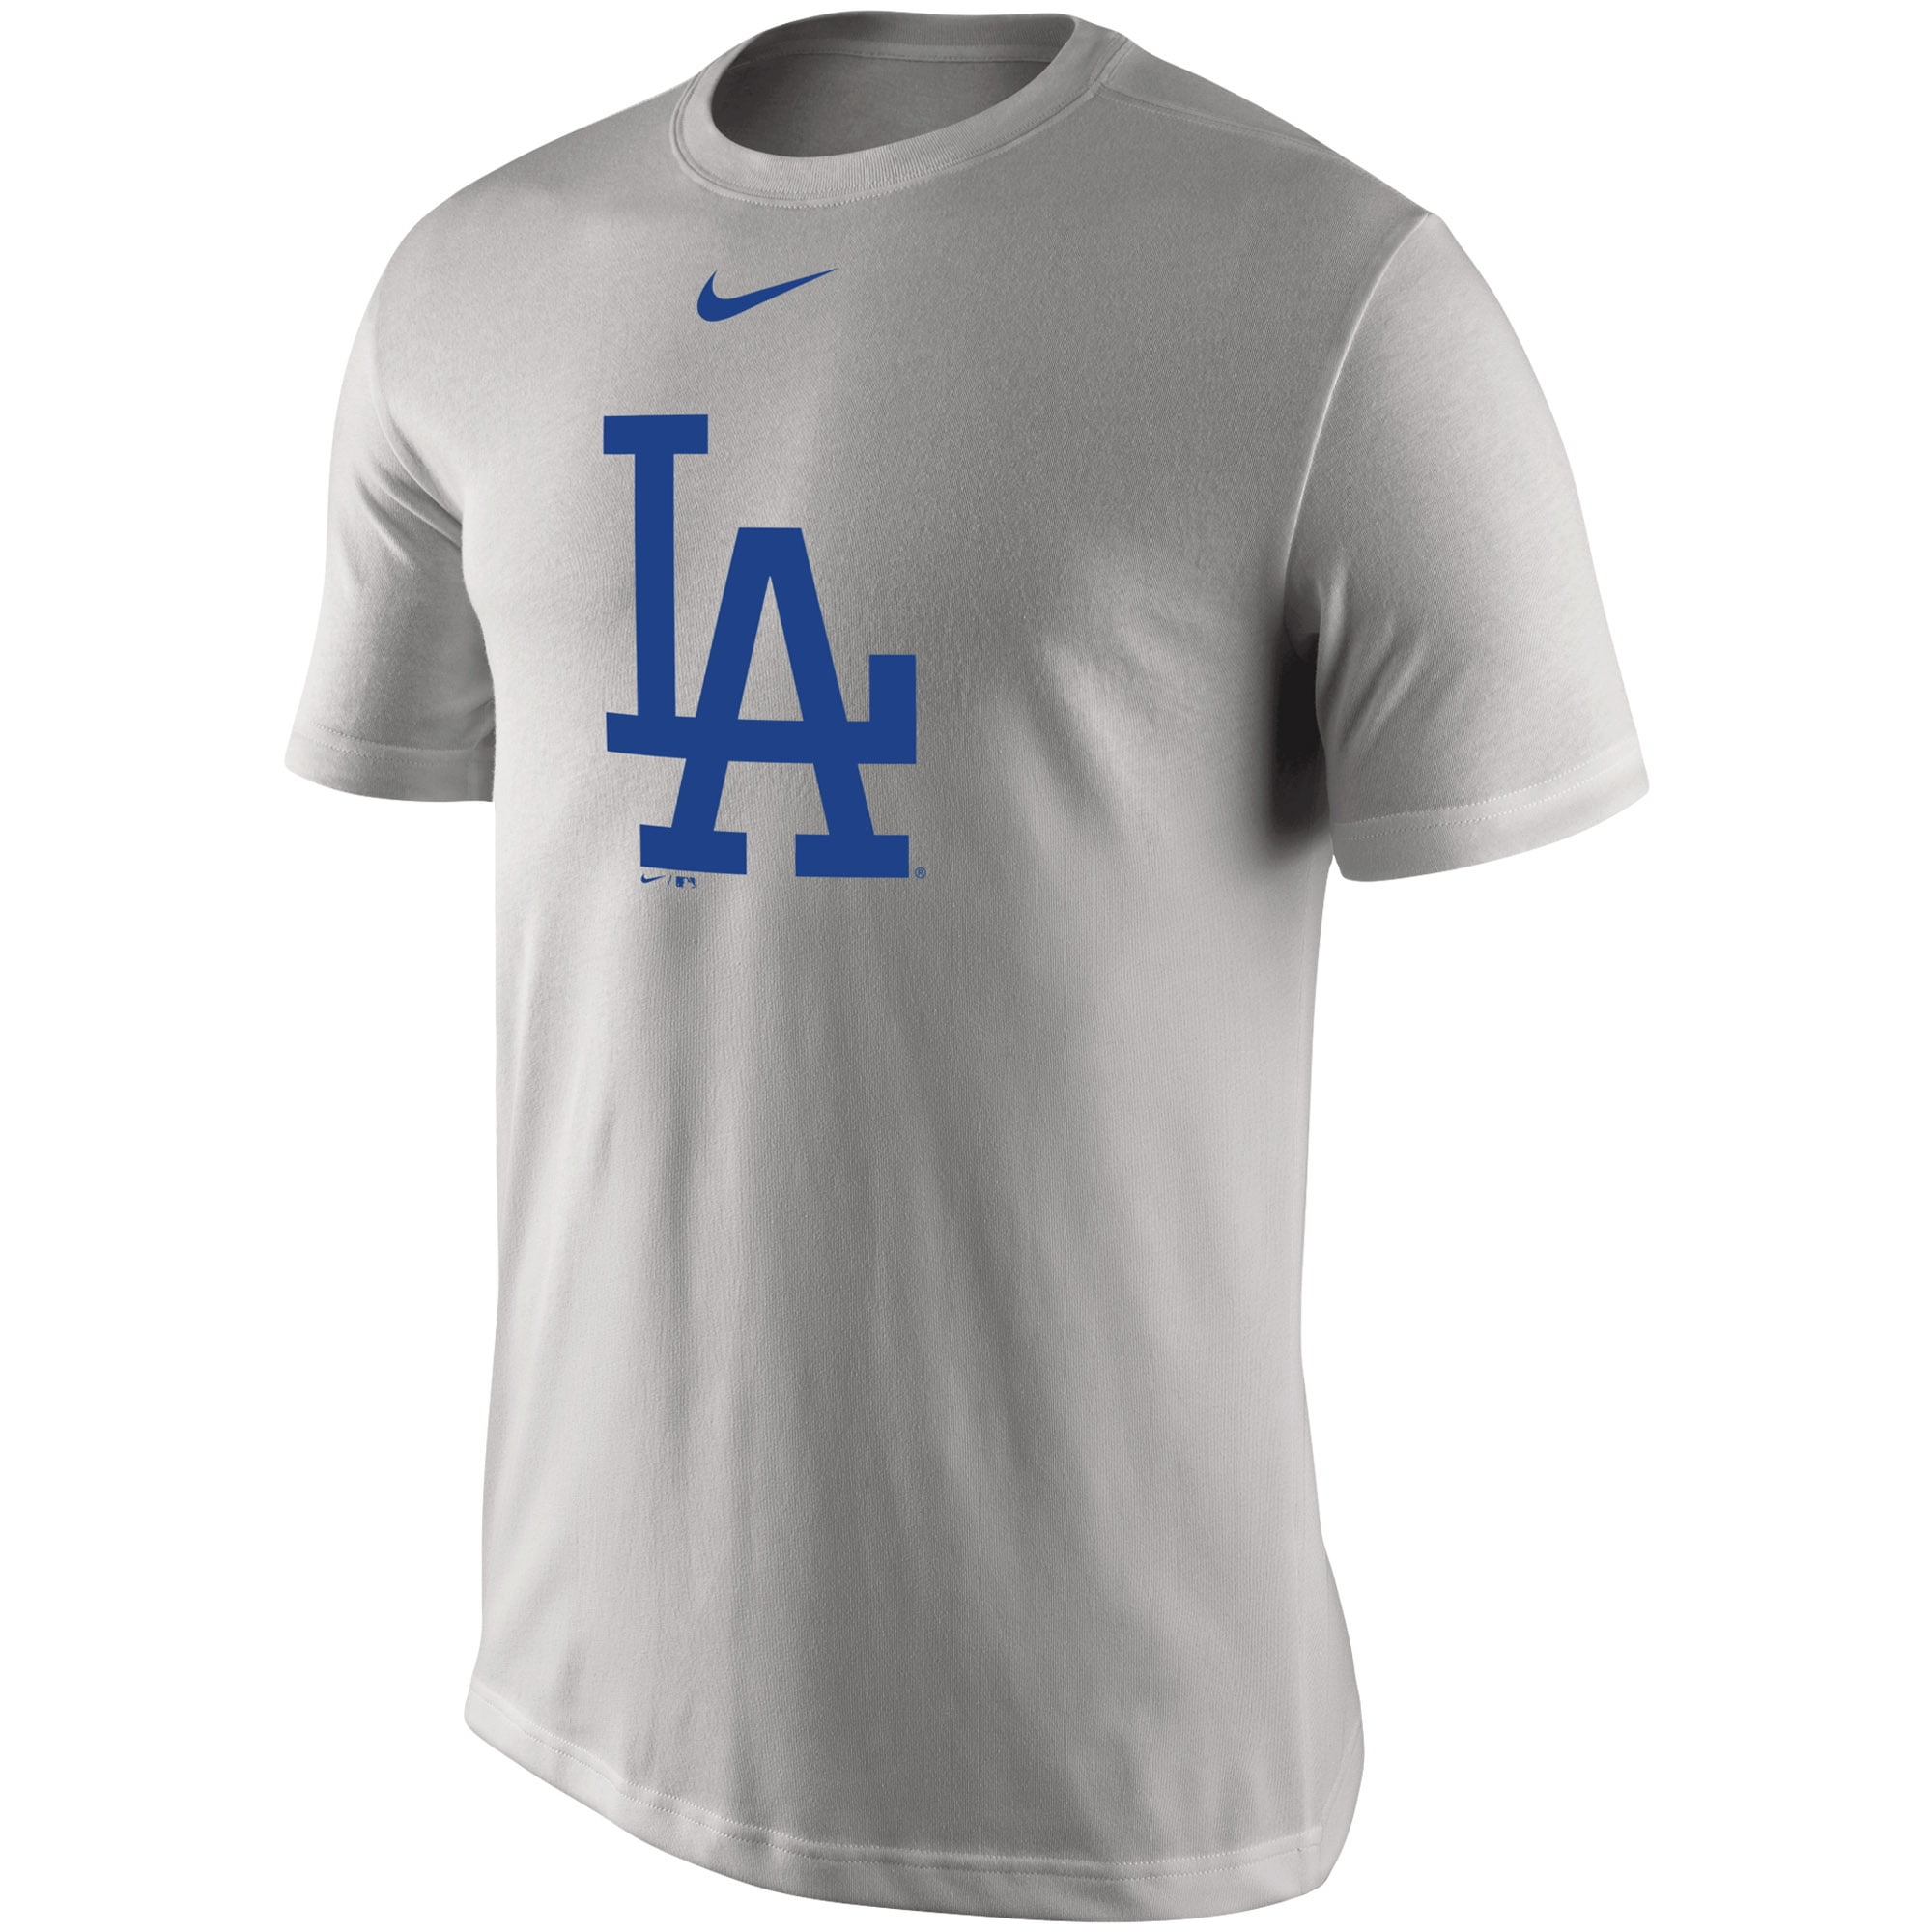 where can i buy dodger shirts